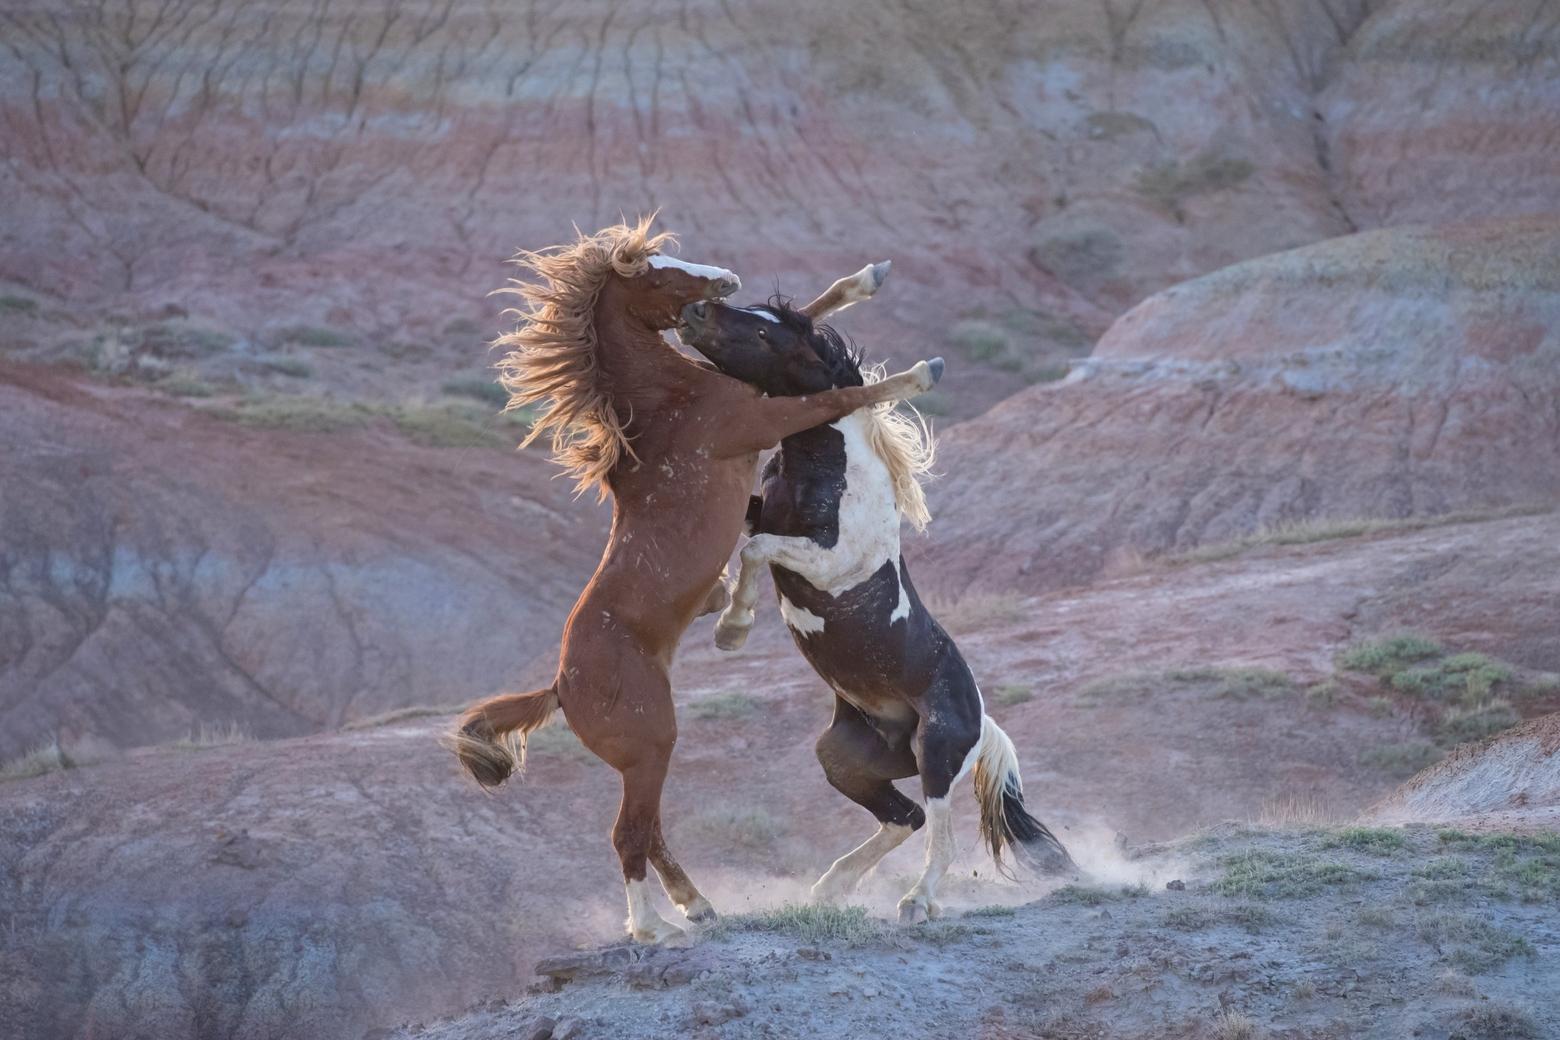 Battle at Red Rock: Stallions Kiamichi and TNT battle near a cliff edge in the badlands of McCullough Peaks. Photo by Sandy Sisti